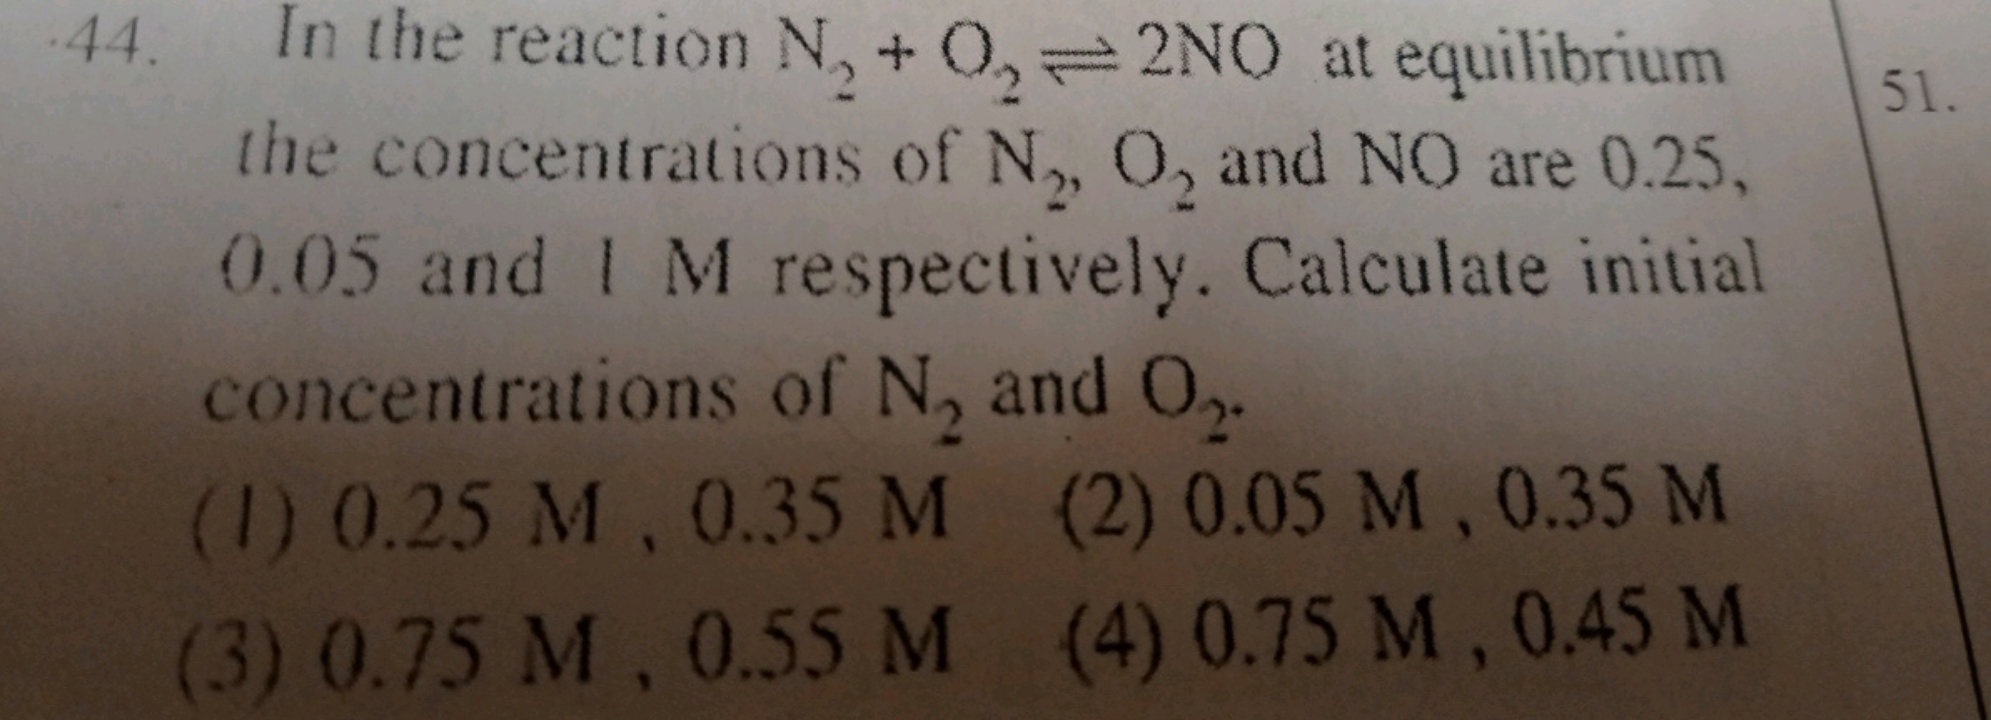 In the reaction N2​+O2​⇌2NO at equilibrium the concentrations of N2​,O